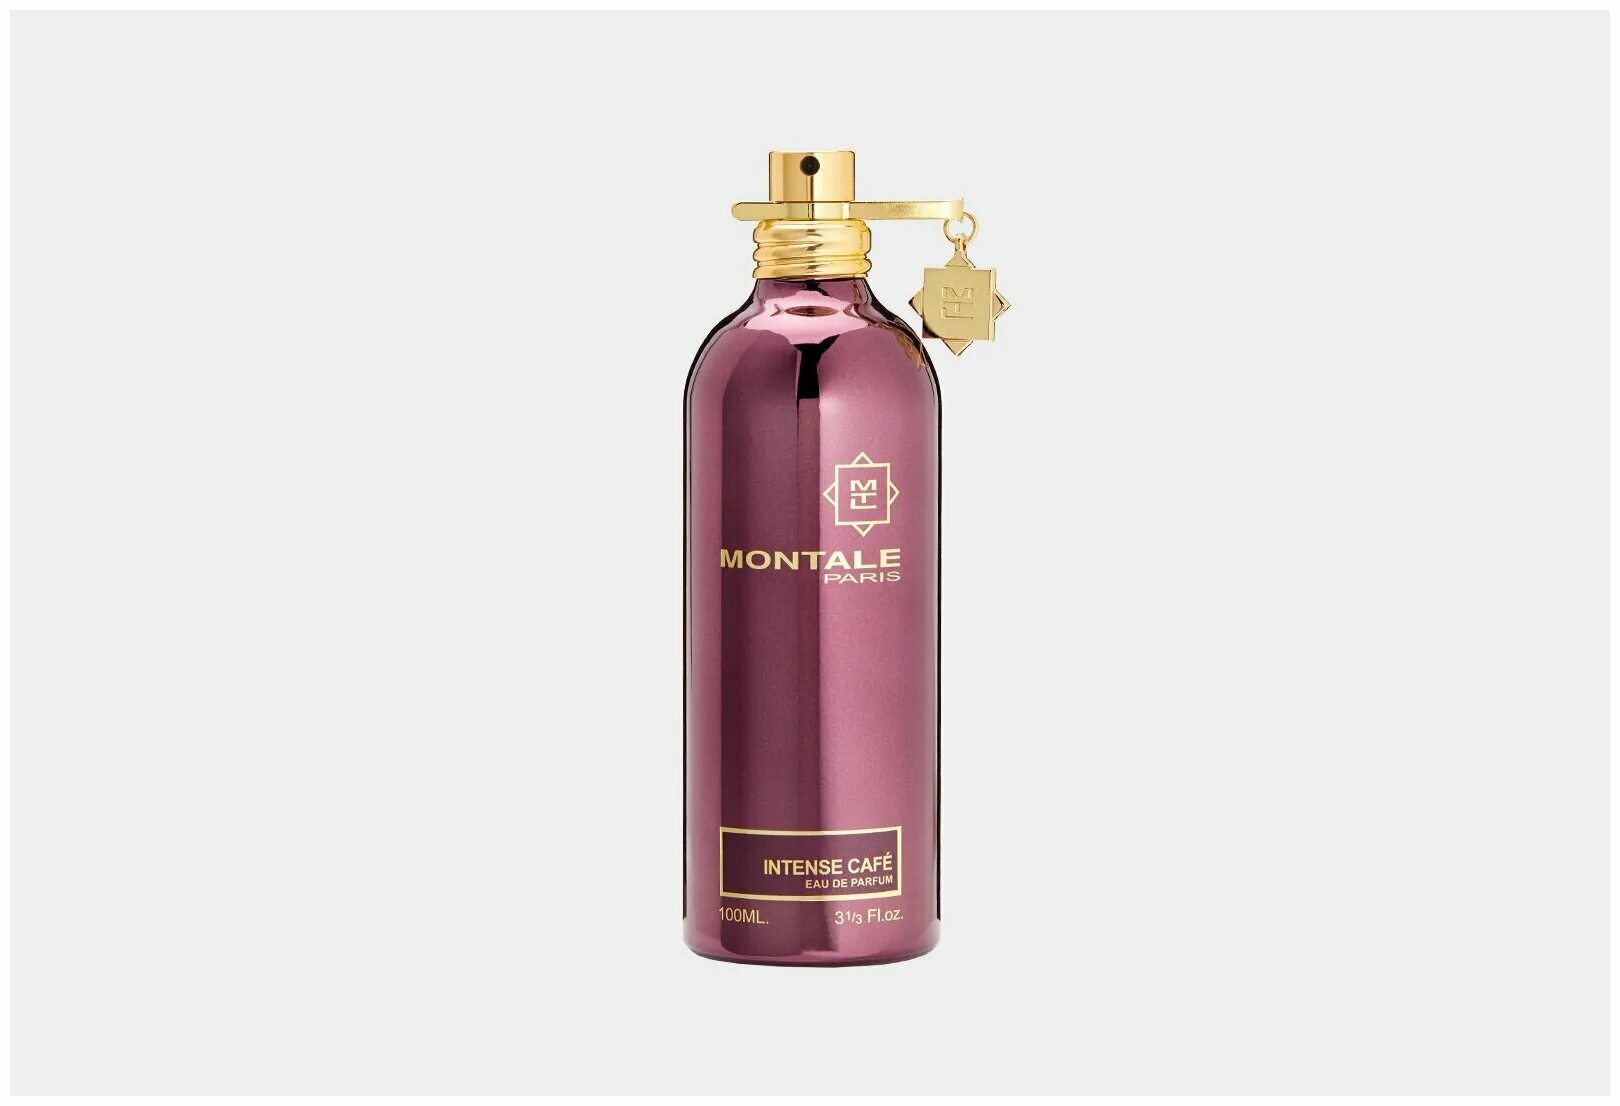 Saheb intense. Montale intense Cafe. Montale intense Cafe 100. Montale intense Cafe 100ml. Montale intense Cafe парфюмерная вода 100 мл.